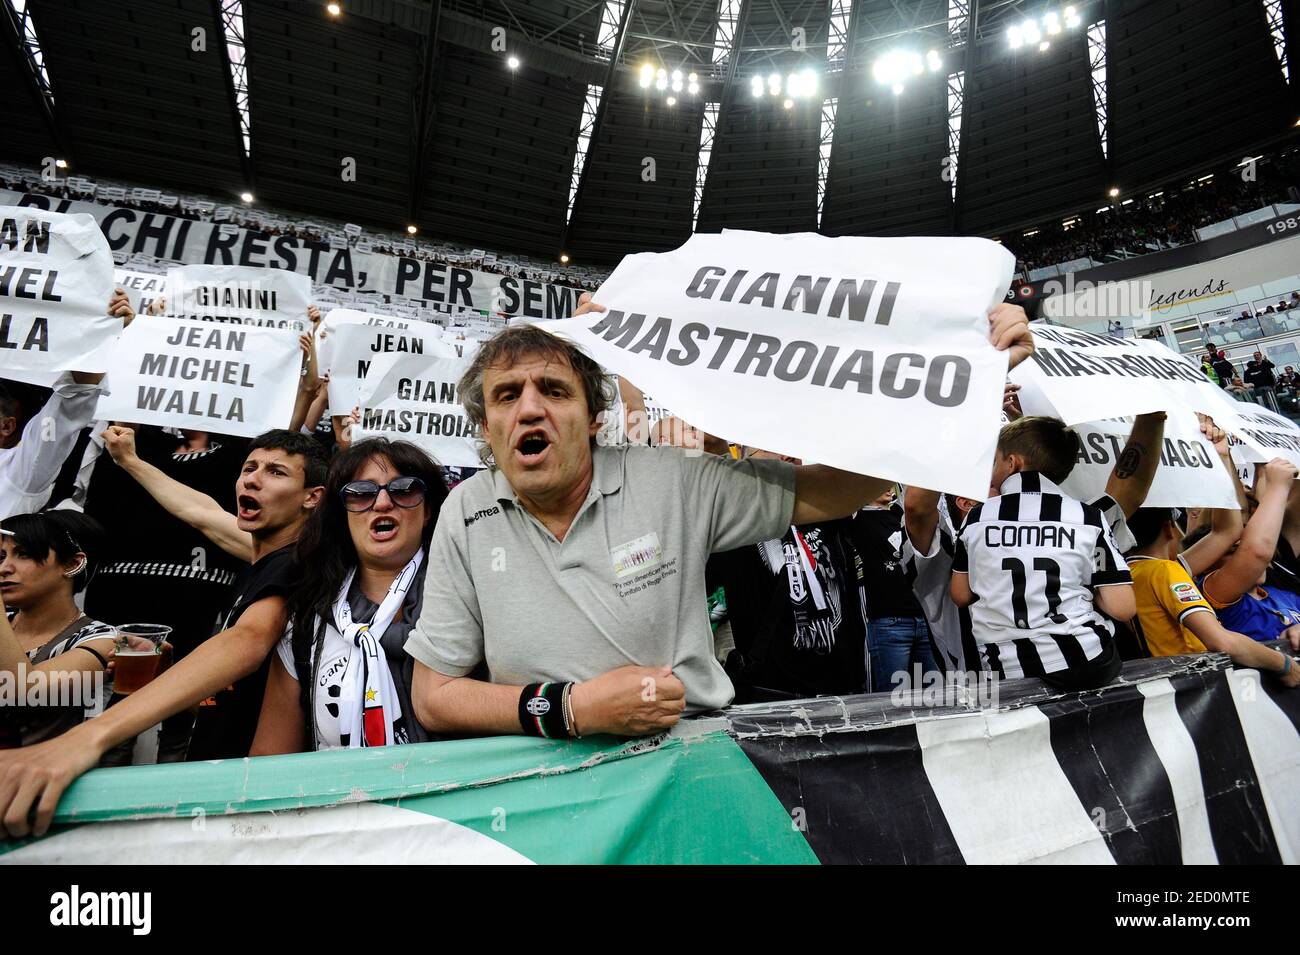 Football - Juventus v Napoli - Italian Serie A - Juventus Stadium, Turin -  23/5/15 Juventus' fans display banners in memory of the victims of the  Heysel disaster Reuters / Giorgio Perottino Stock Photo - Alamy